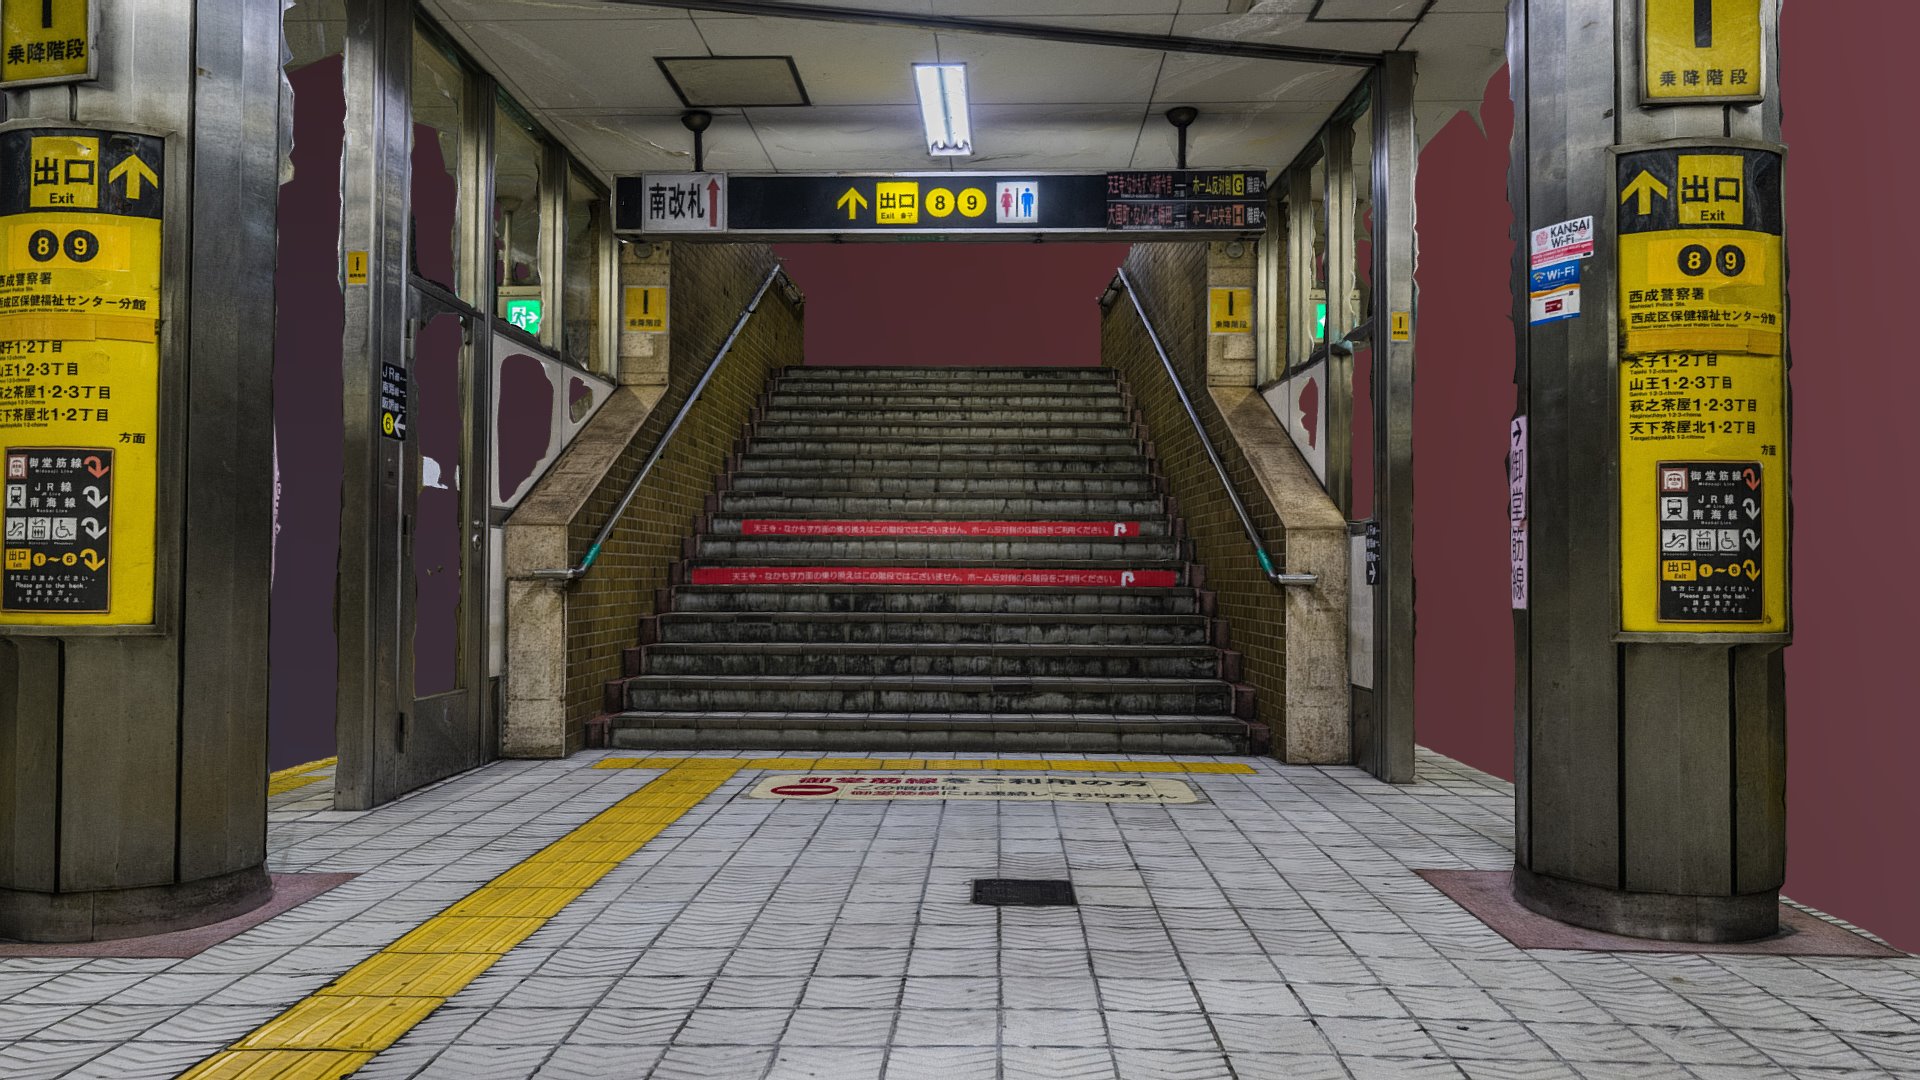 3D model Osaka subway station stairs photogrammetry scan - This is a 3D model of the Osaka subway station stairs photogrammetry scan. The 3D model is about a staircase in a building.